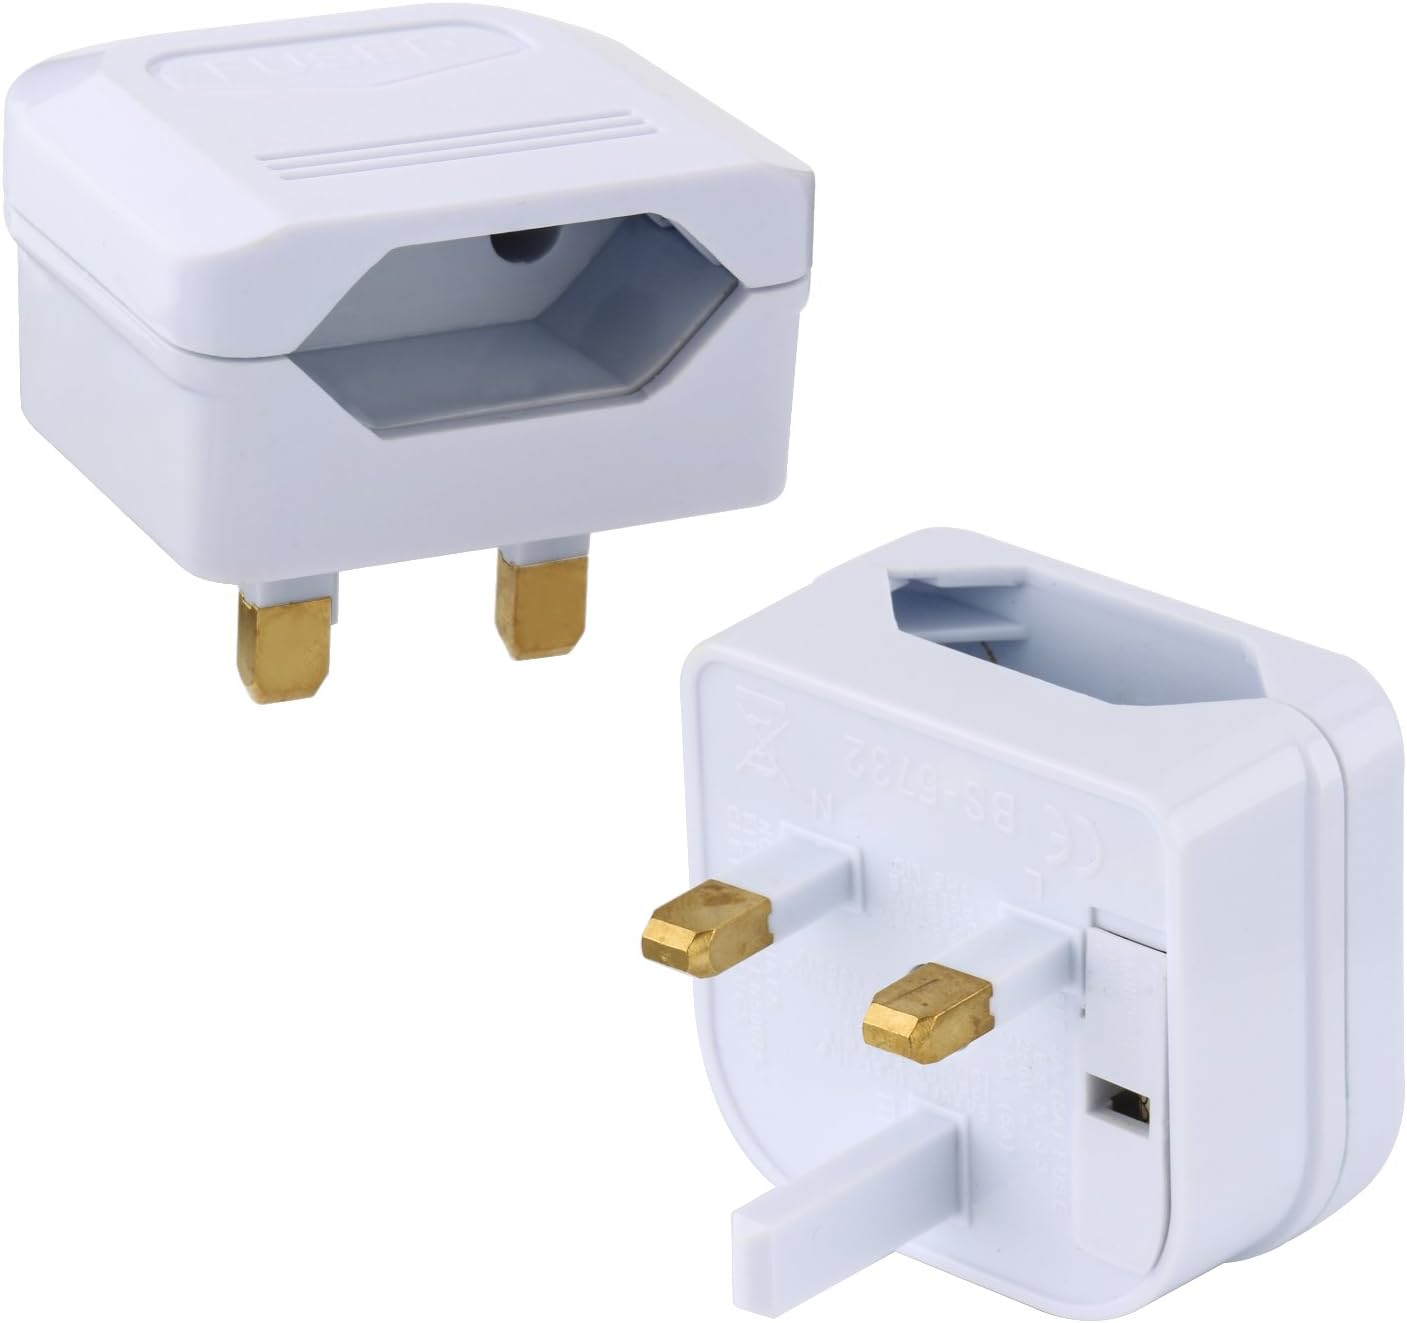 What Adapter Do I Need For England